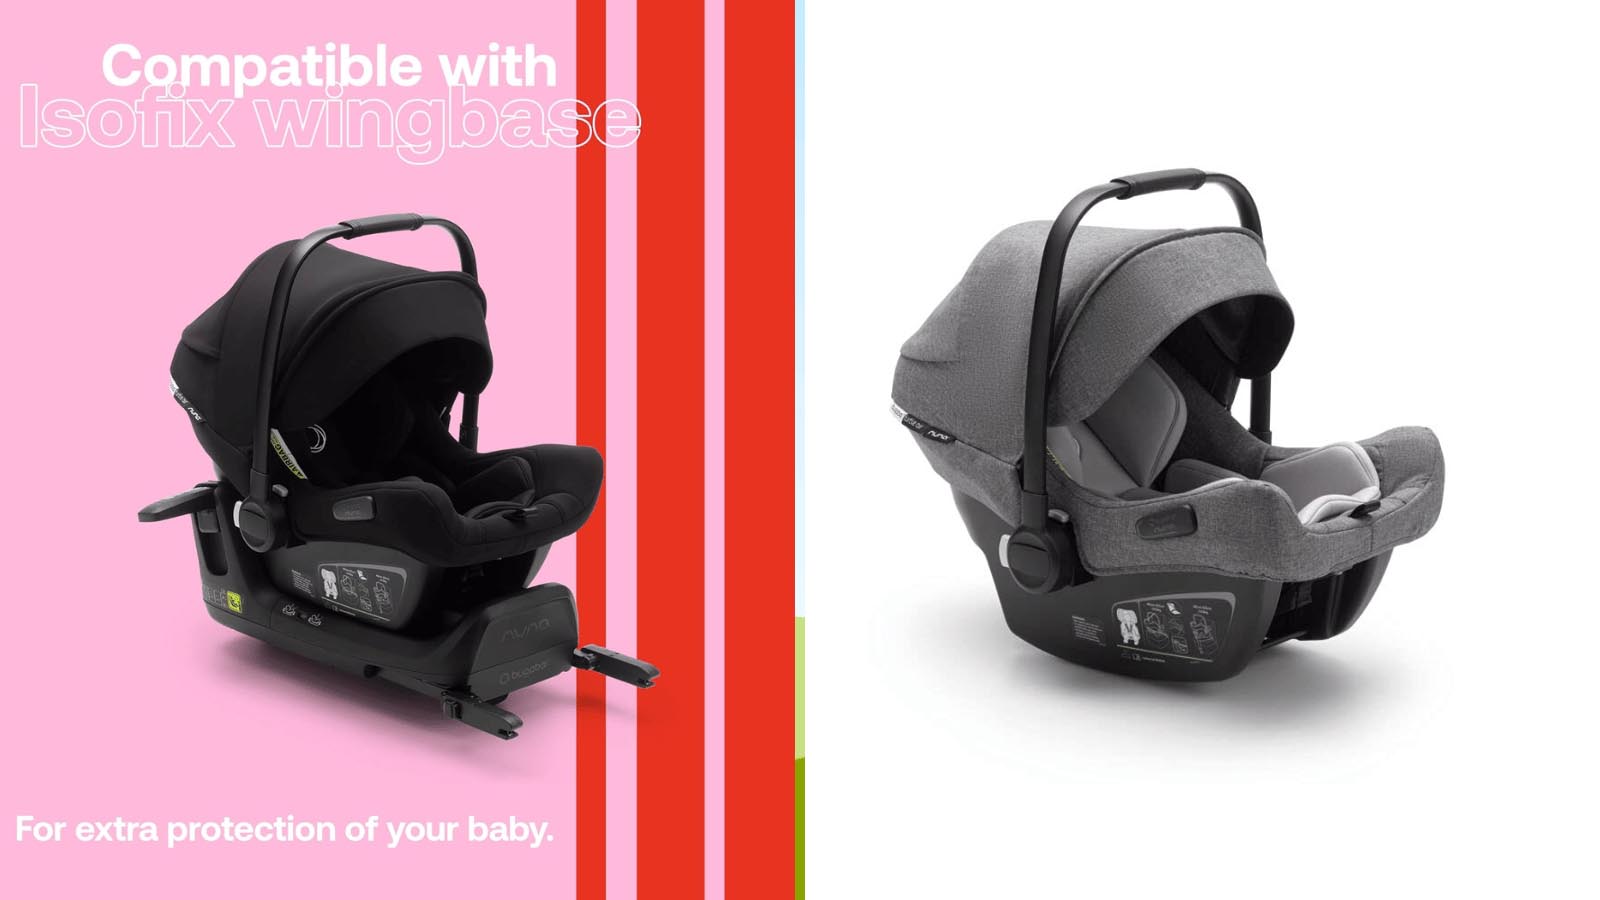 My Honest Review of the Bugaboo Turtle Air by Nuna Car Seat